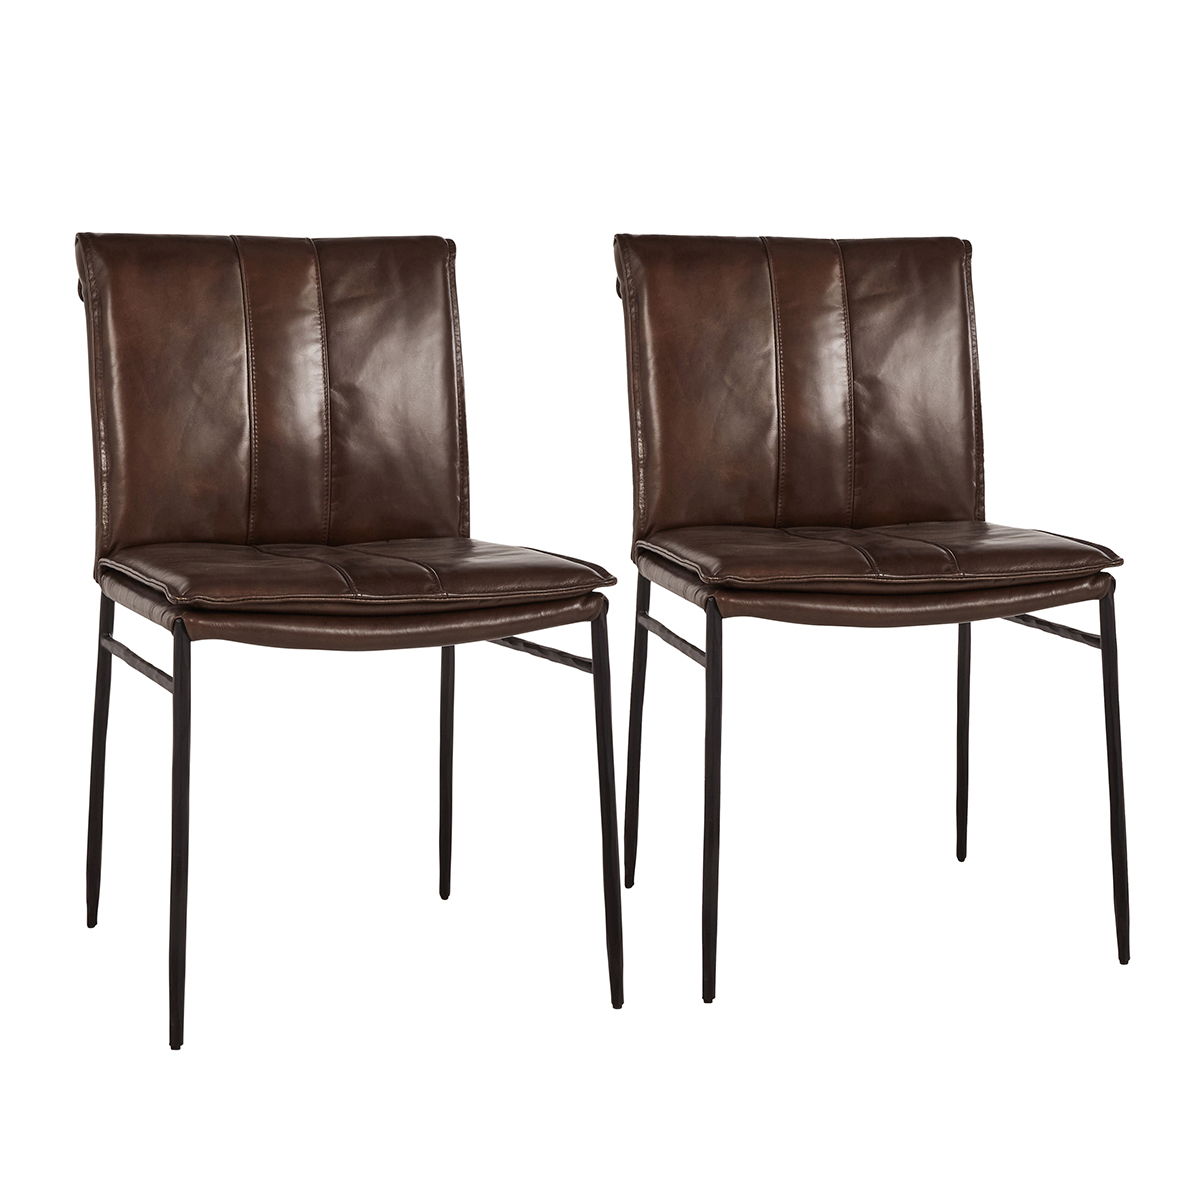 Mayer - Dining Chair (Set of 2) - Brown